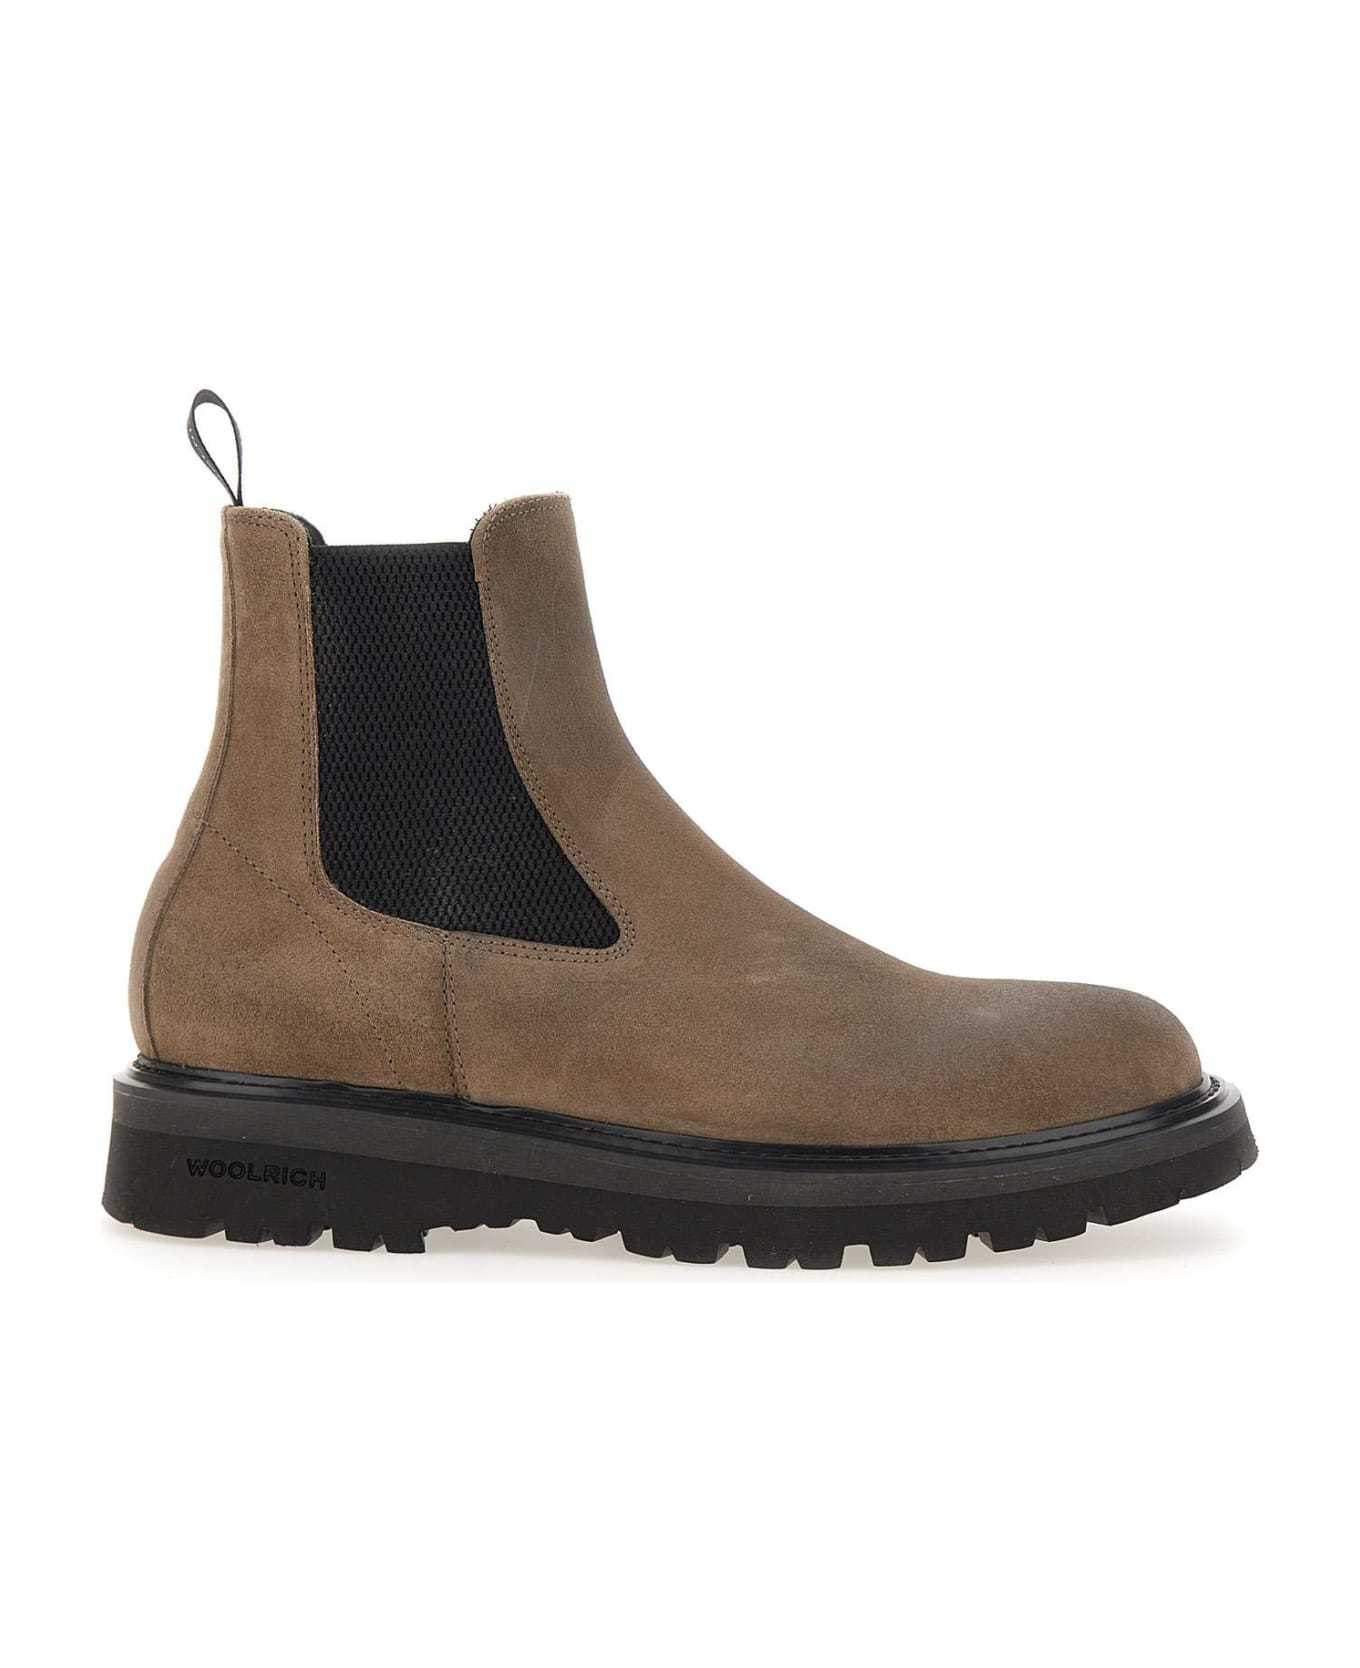 Woolrich 'chelsea New City' Leather Boots - Beige